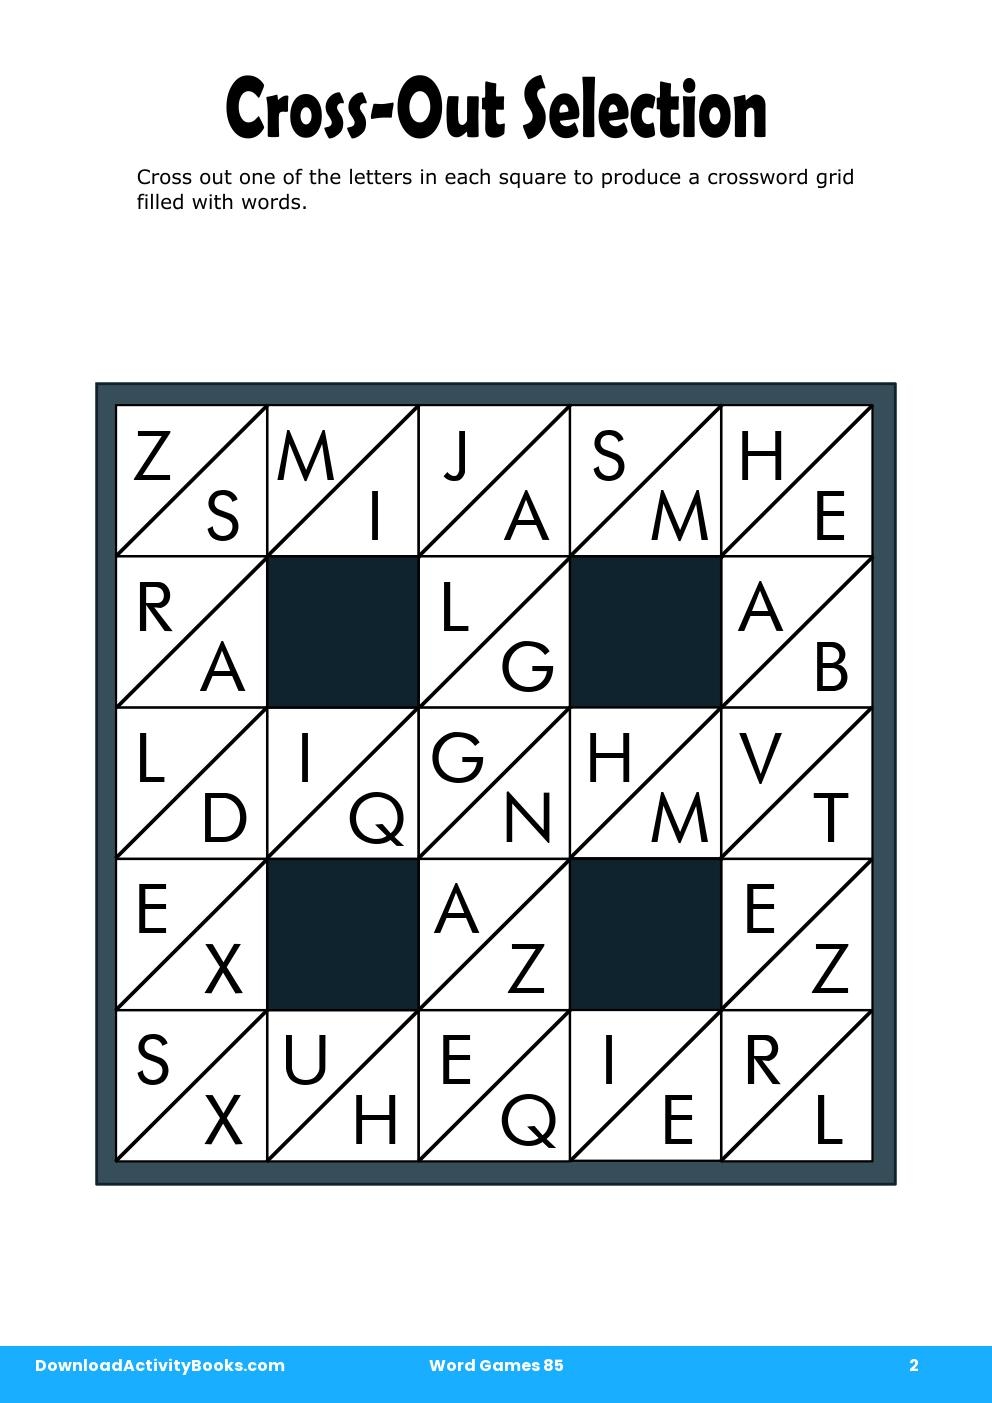 Cross-Out Selection in Word Games 85